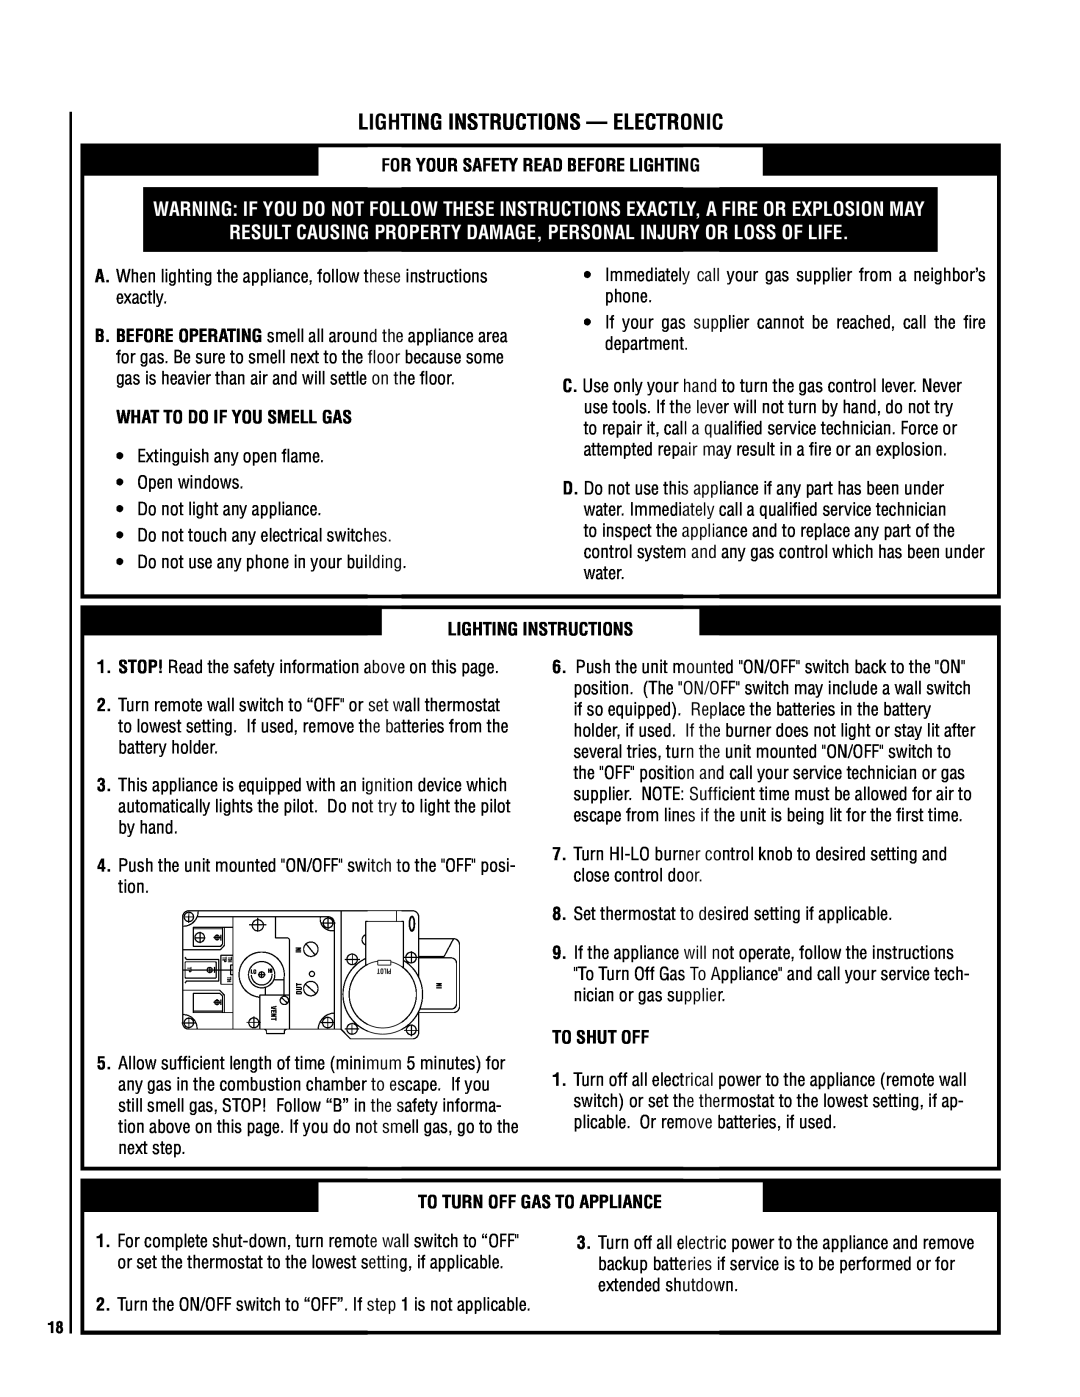 TOA Electronics SLDVT-40 manual For Your Safety Read Before Lighting, What To Do If You Smell Gas, Lighting Instructions 